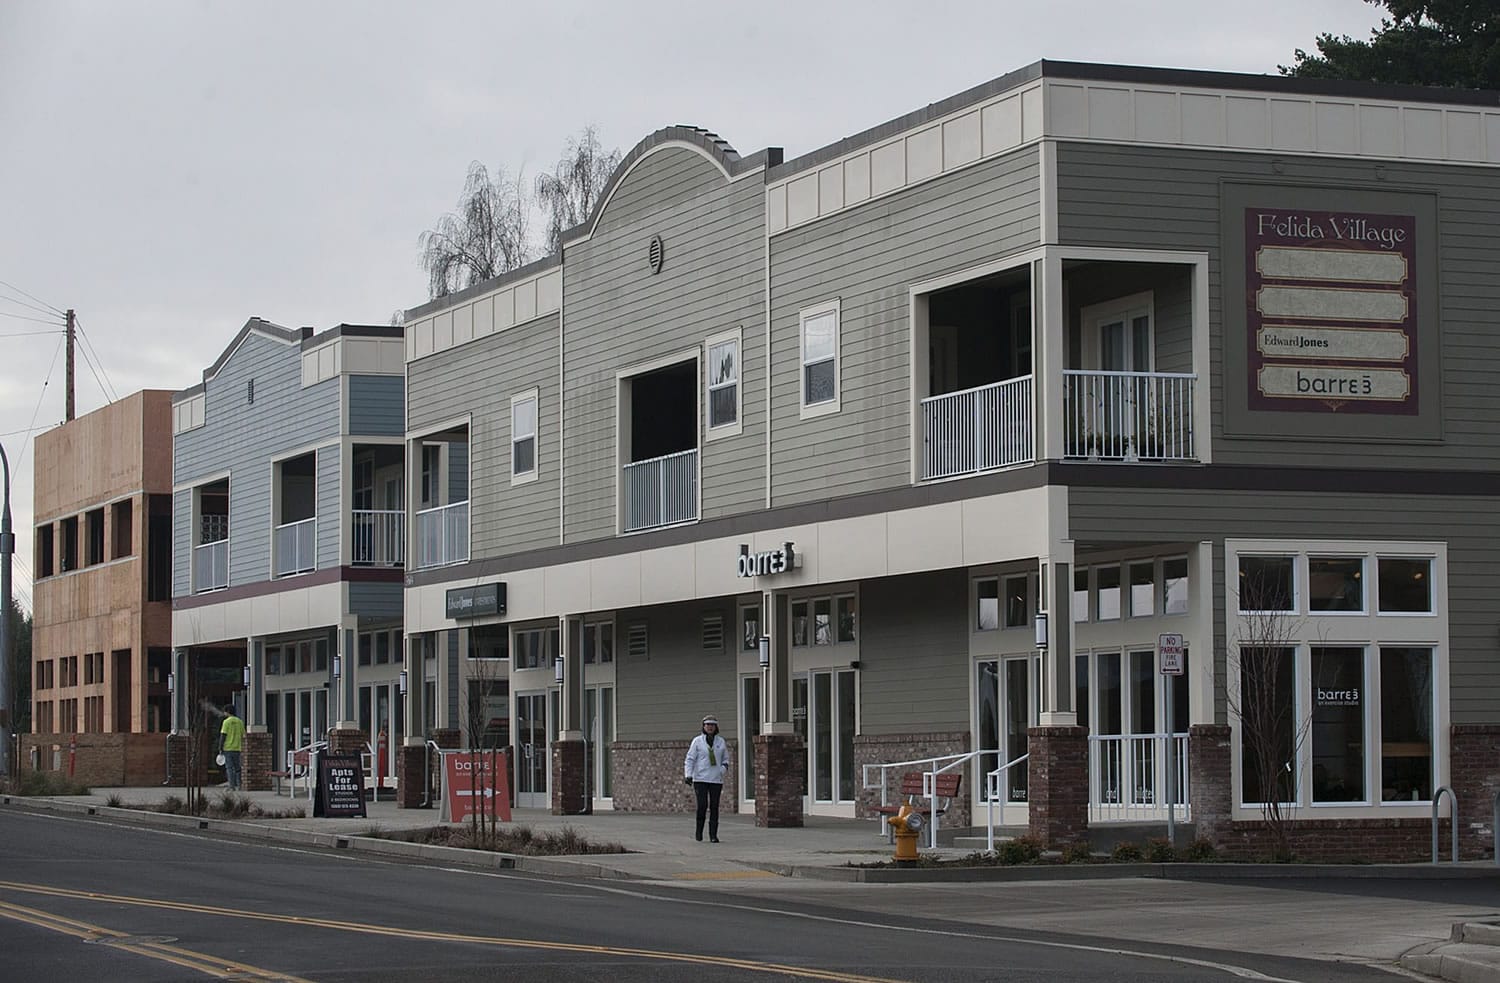 A pedestrian walks past buildings Felida Village, the new development project which includes a mix of commercial and residential space at the corner of Northwest 119th Street and 36th Avenue. Developer Ron Edwards, who lives five blocks from the new buildings, said he hopes the project becomes a gathering place for the community.